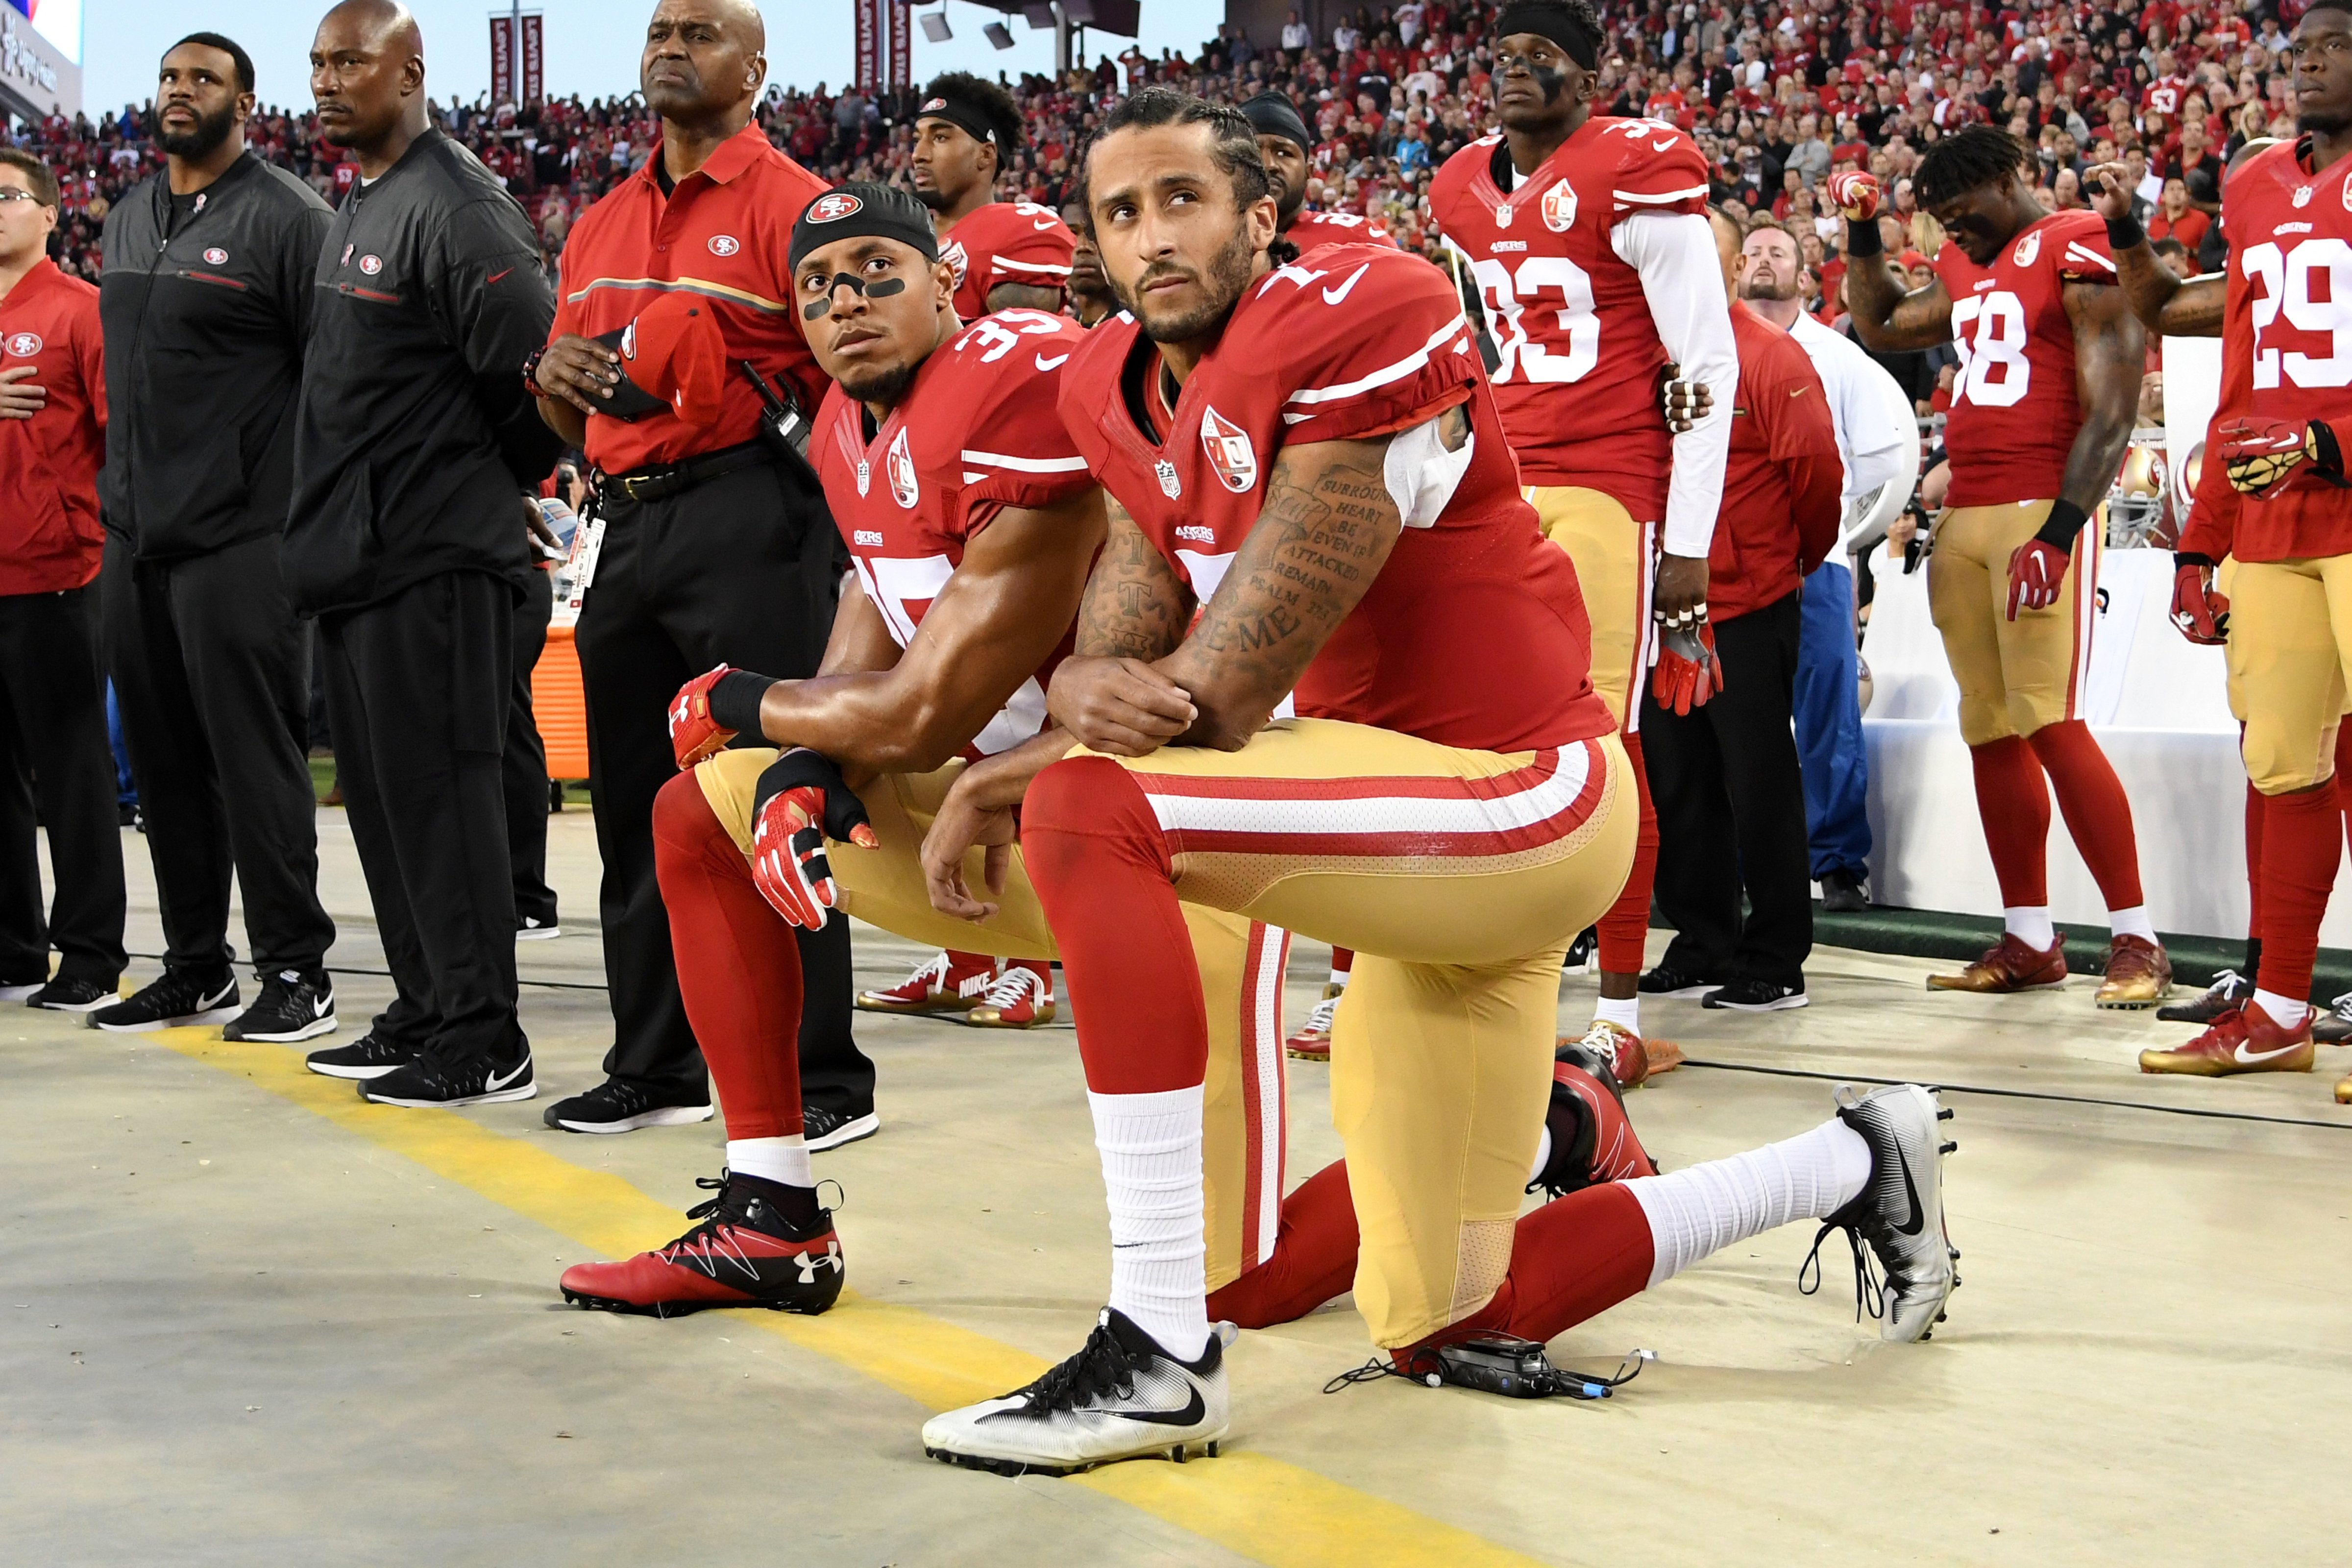 Colin Kaepernick #7 and Eric Reid #35 of the San Francisco 49ers kneel in protest during the national anthem prior to playing the Los Angeles Rams in their NFL game at Levi's Stadium in Santa Clara, Calif., on Sept. 12, 2016. (Thearon W. Henderson—Getty Images)